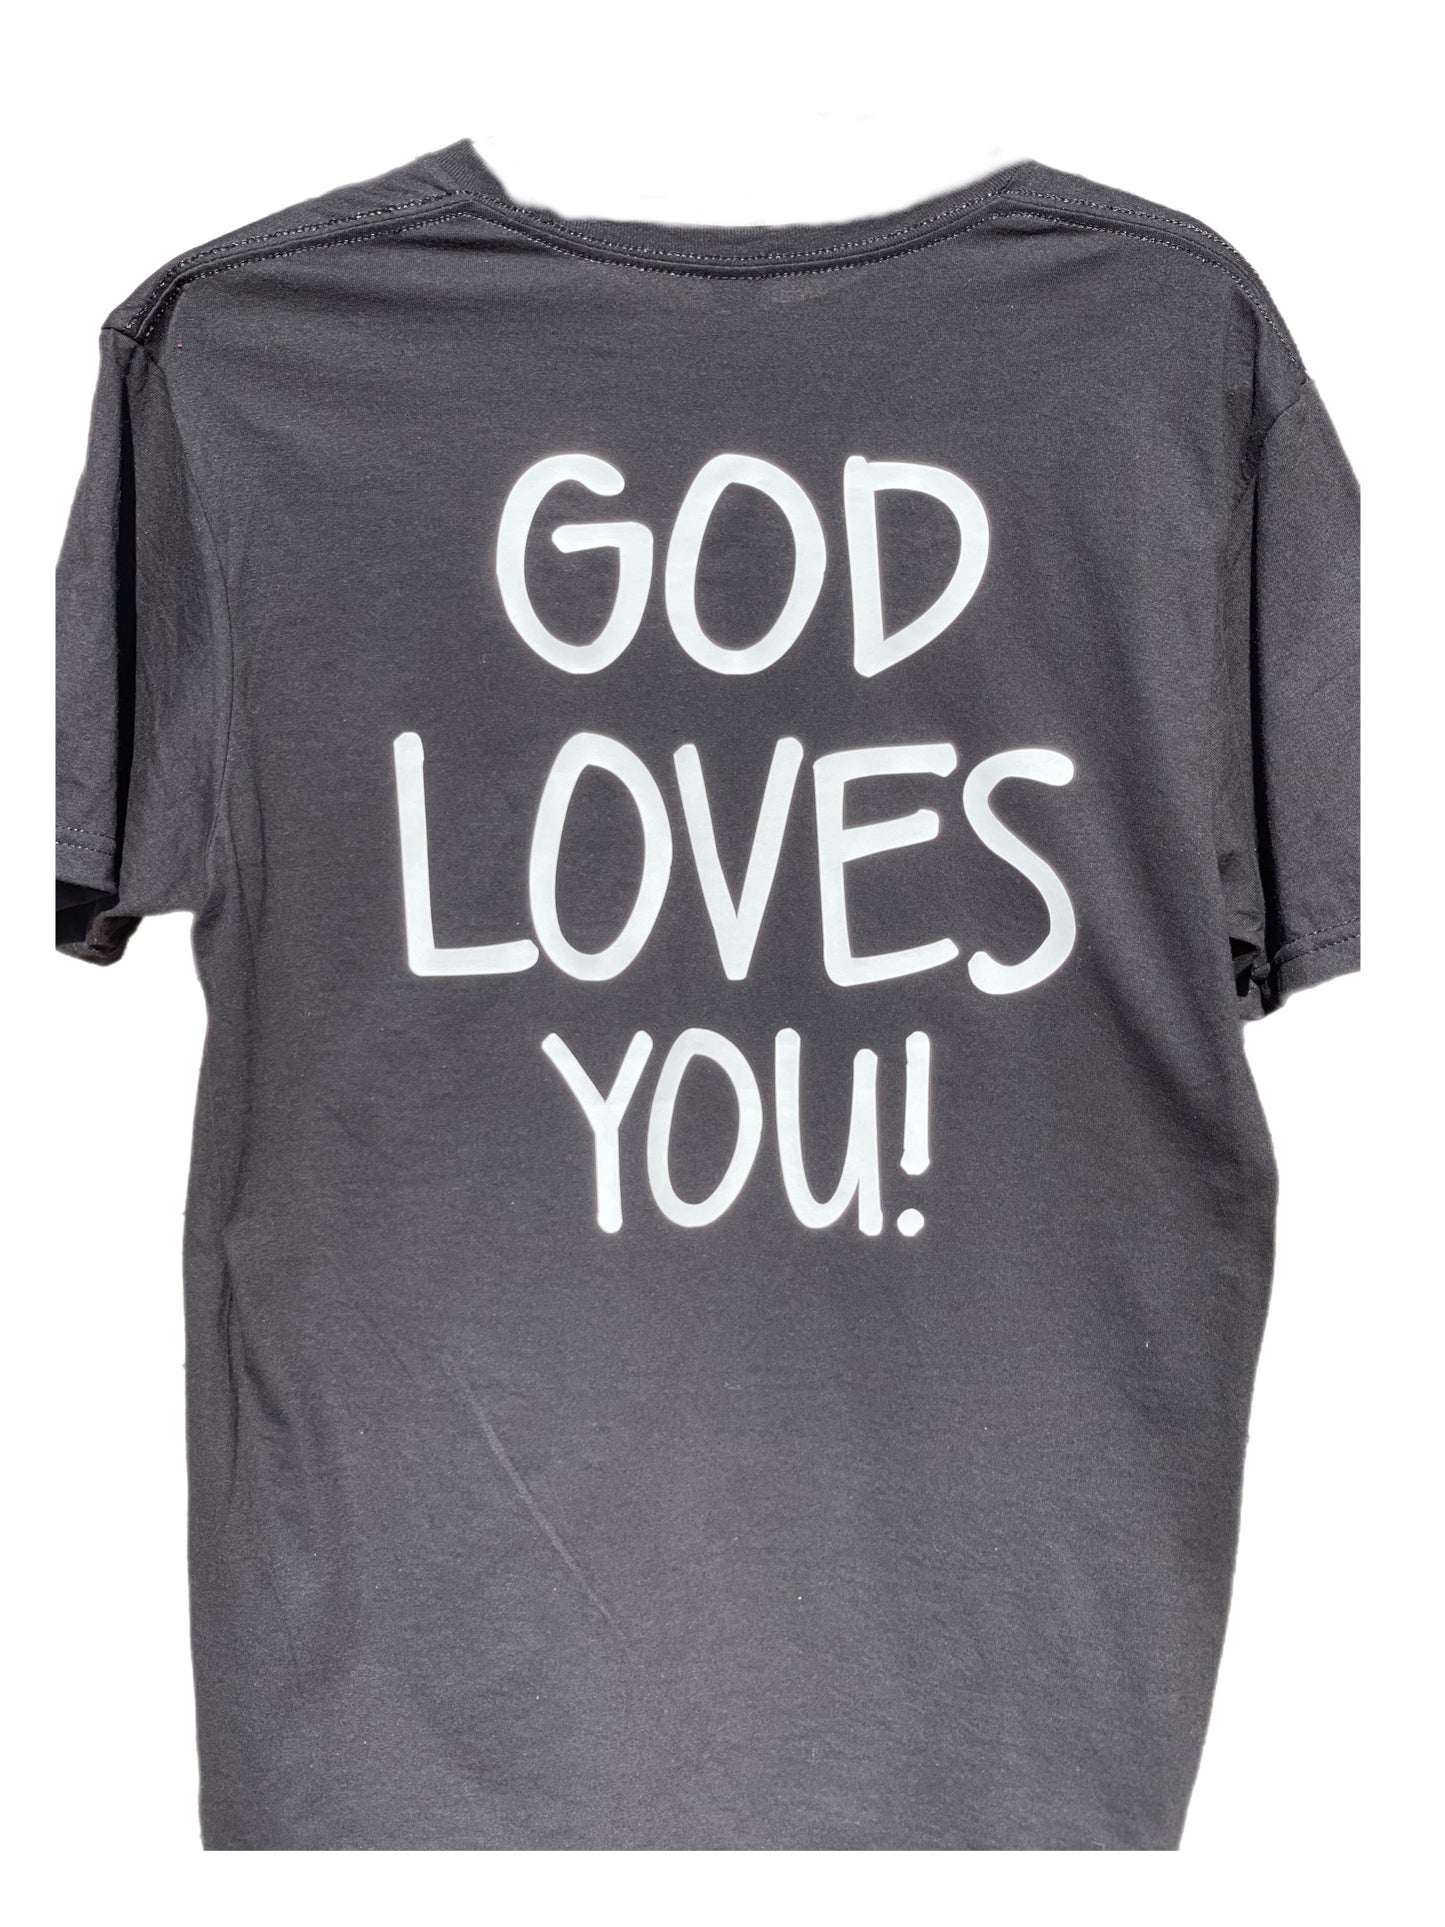 You Are Loved By God!